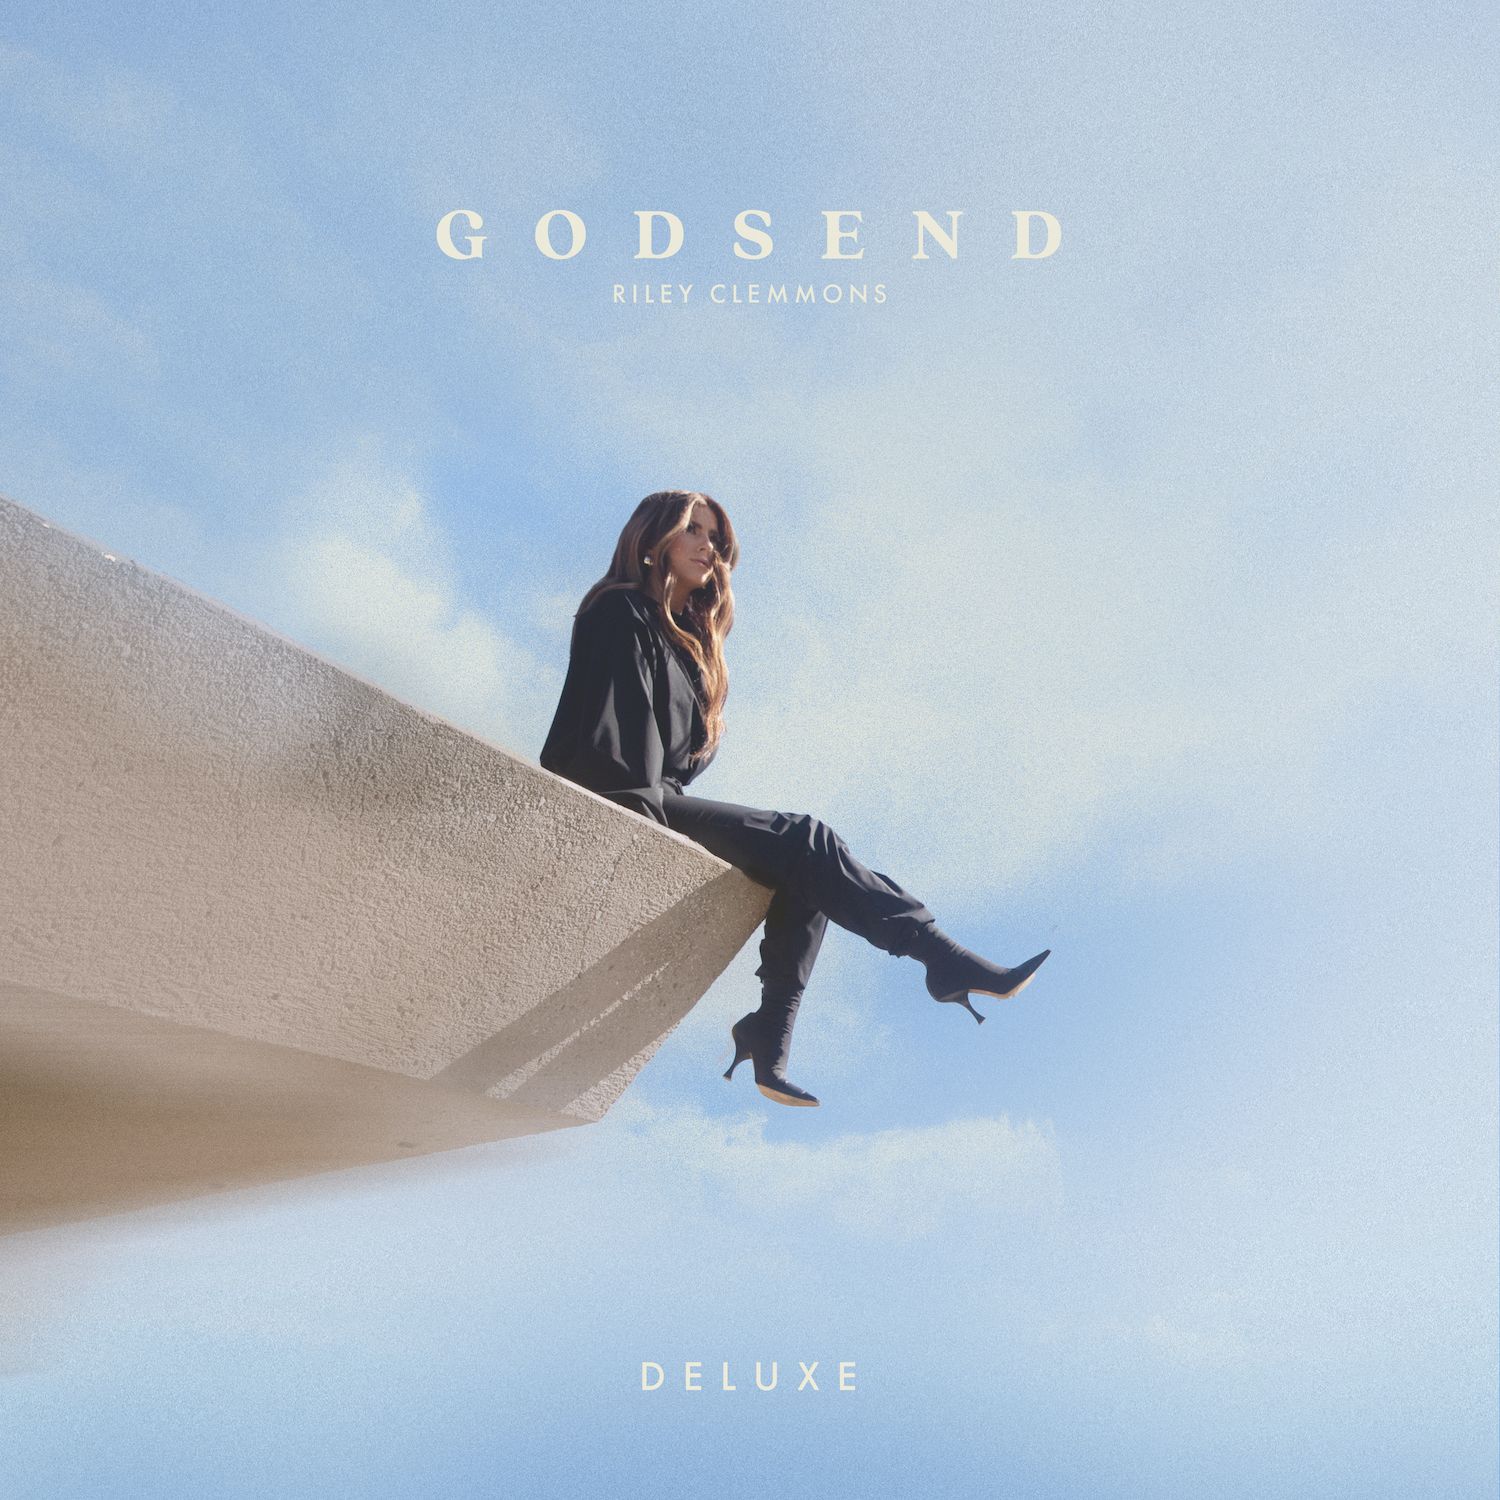 RILEY CLEMMONS TEAMS UP WITH BRETT YOUNG FOR DUET “GODSEND